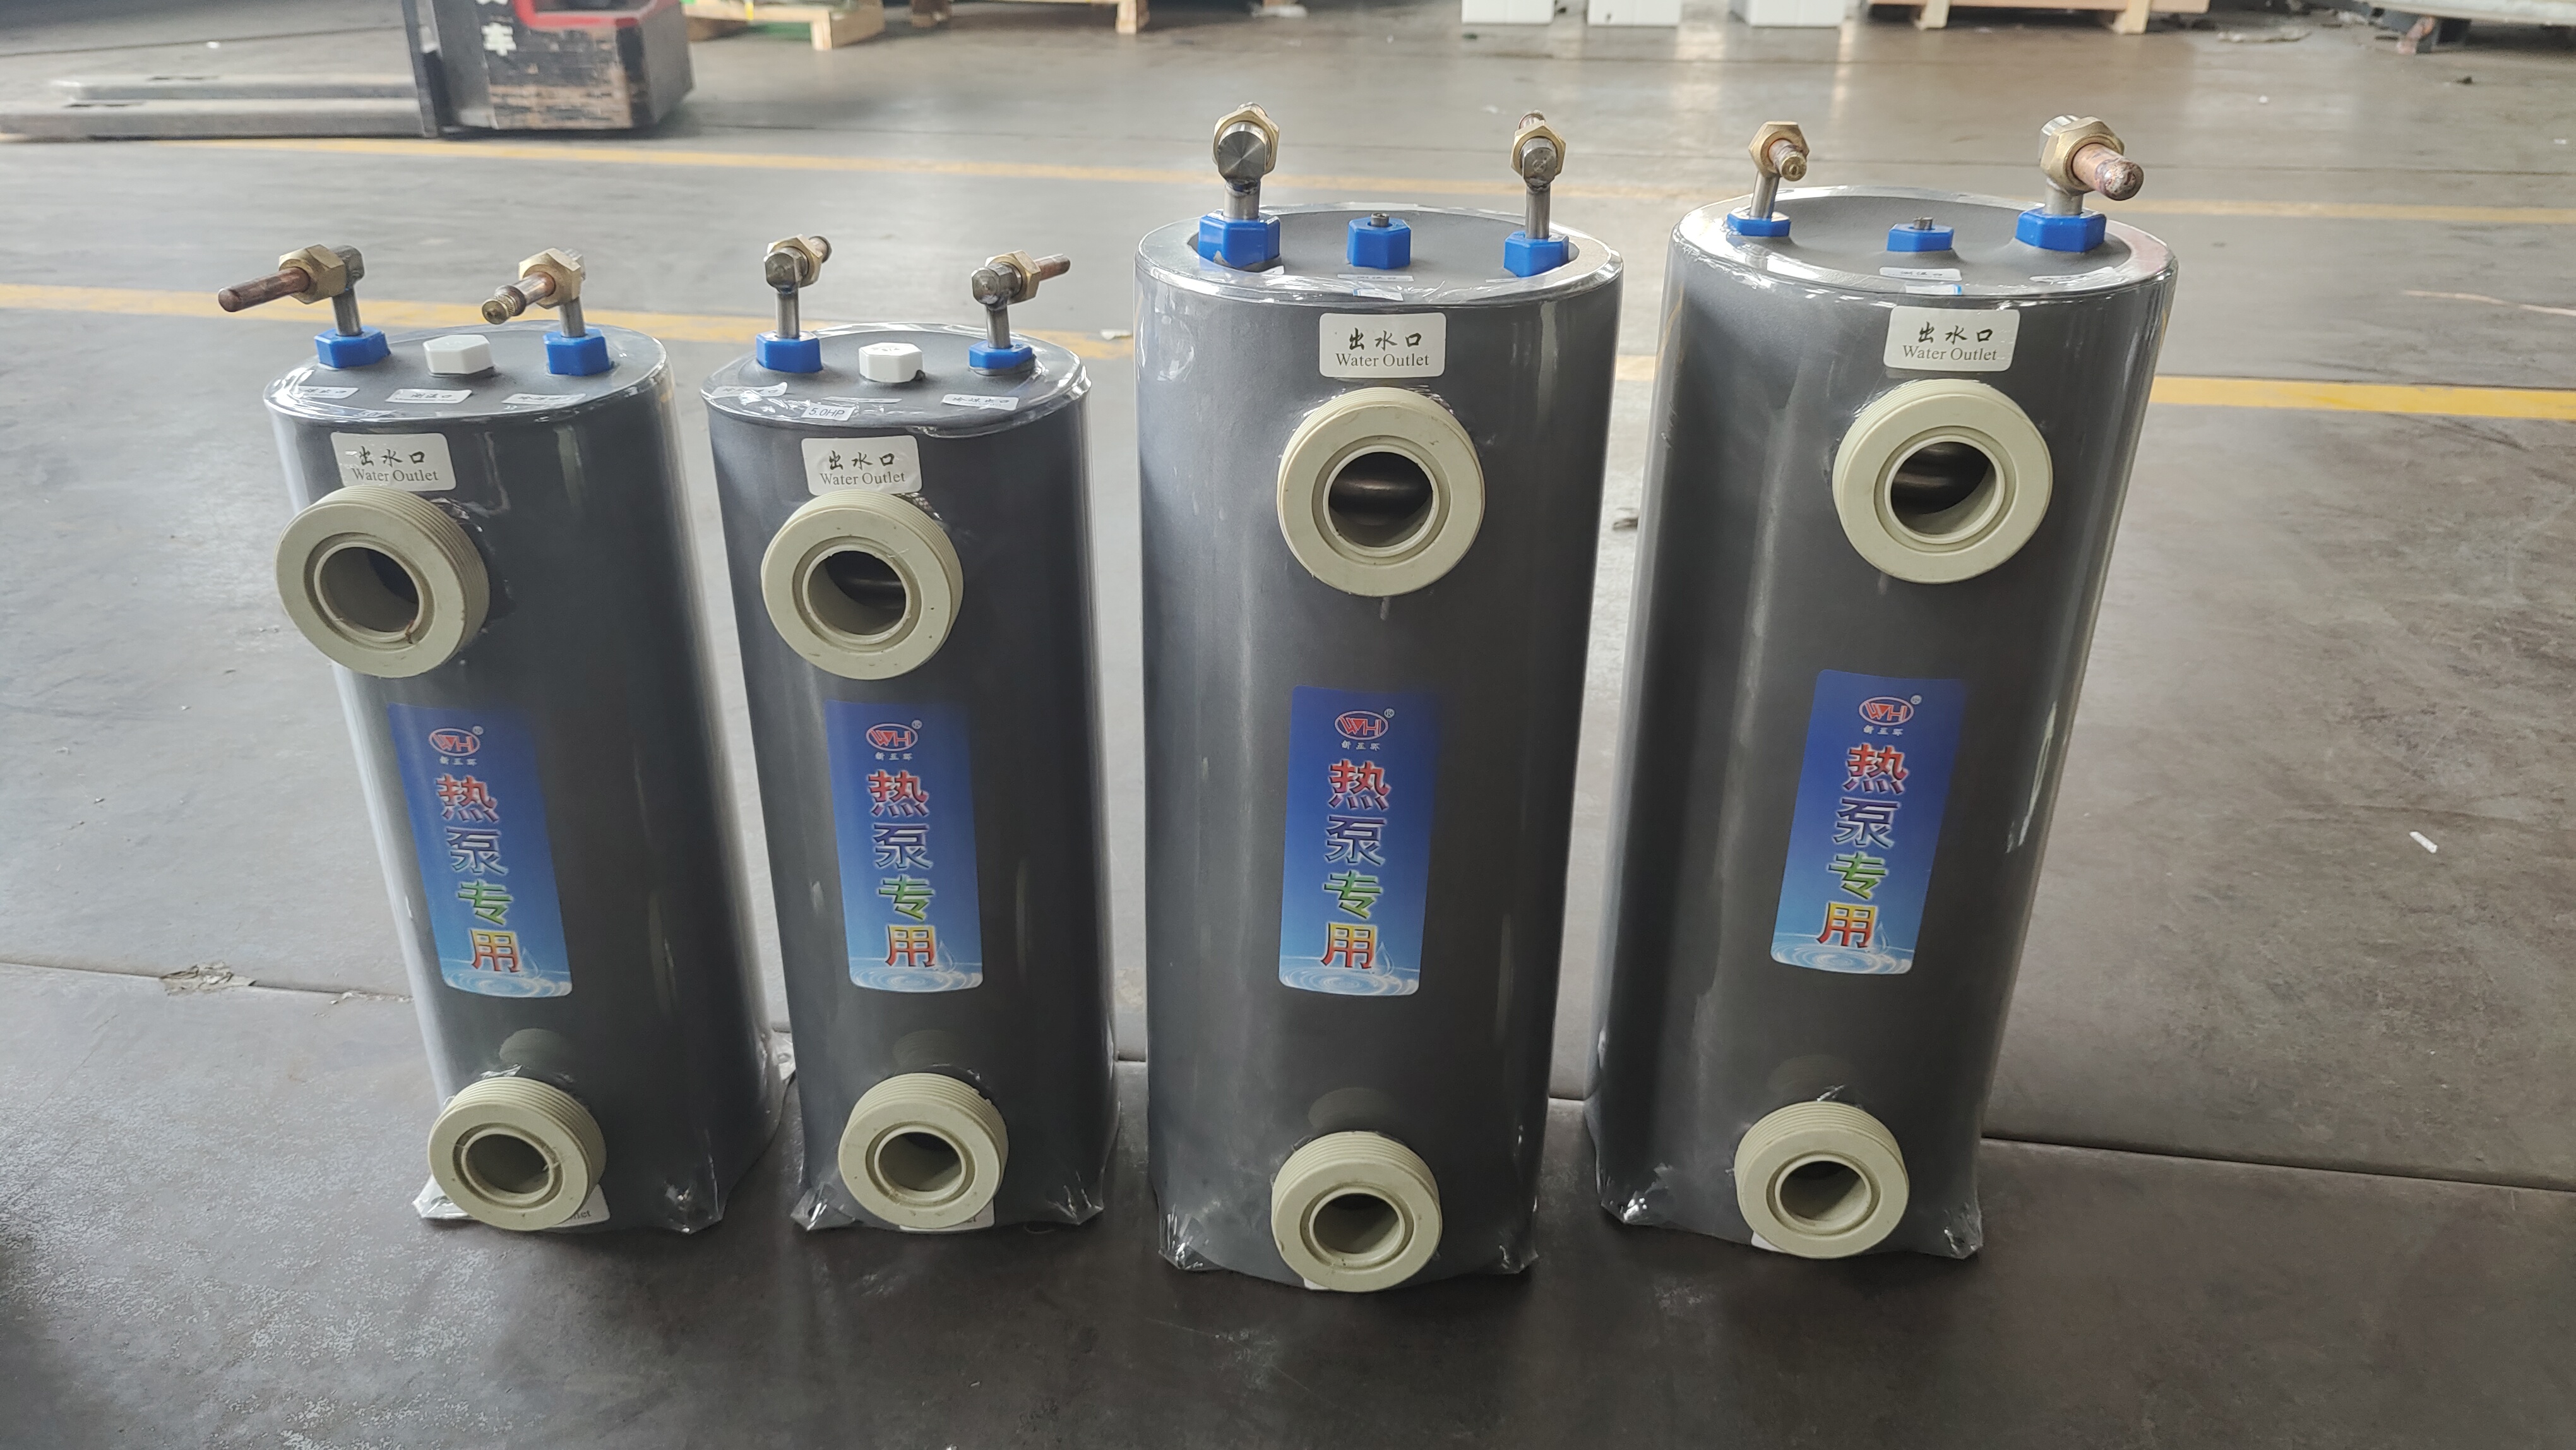 What are the feature of swimming pool heat exchanger?